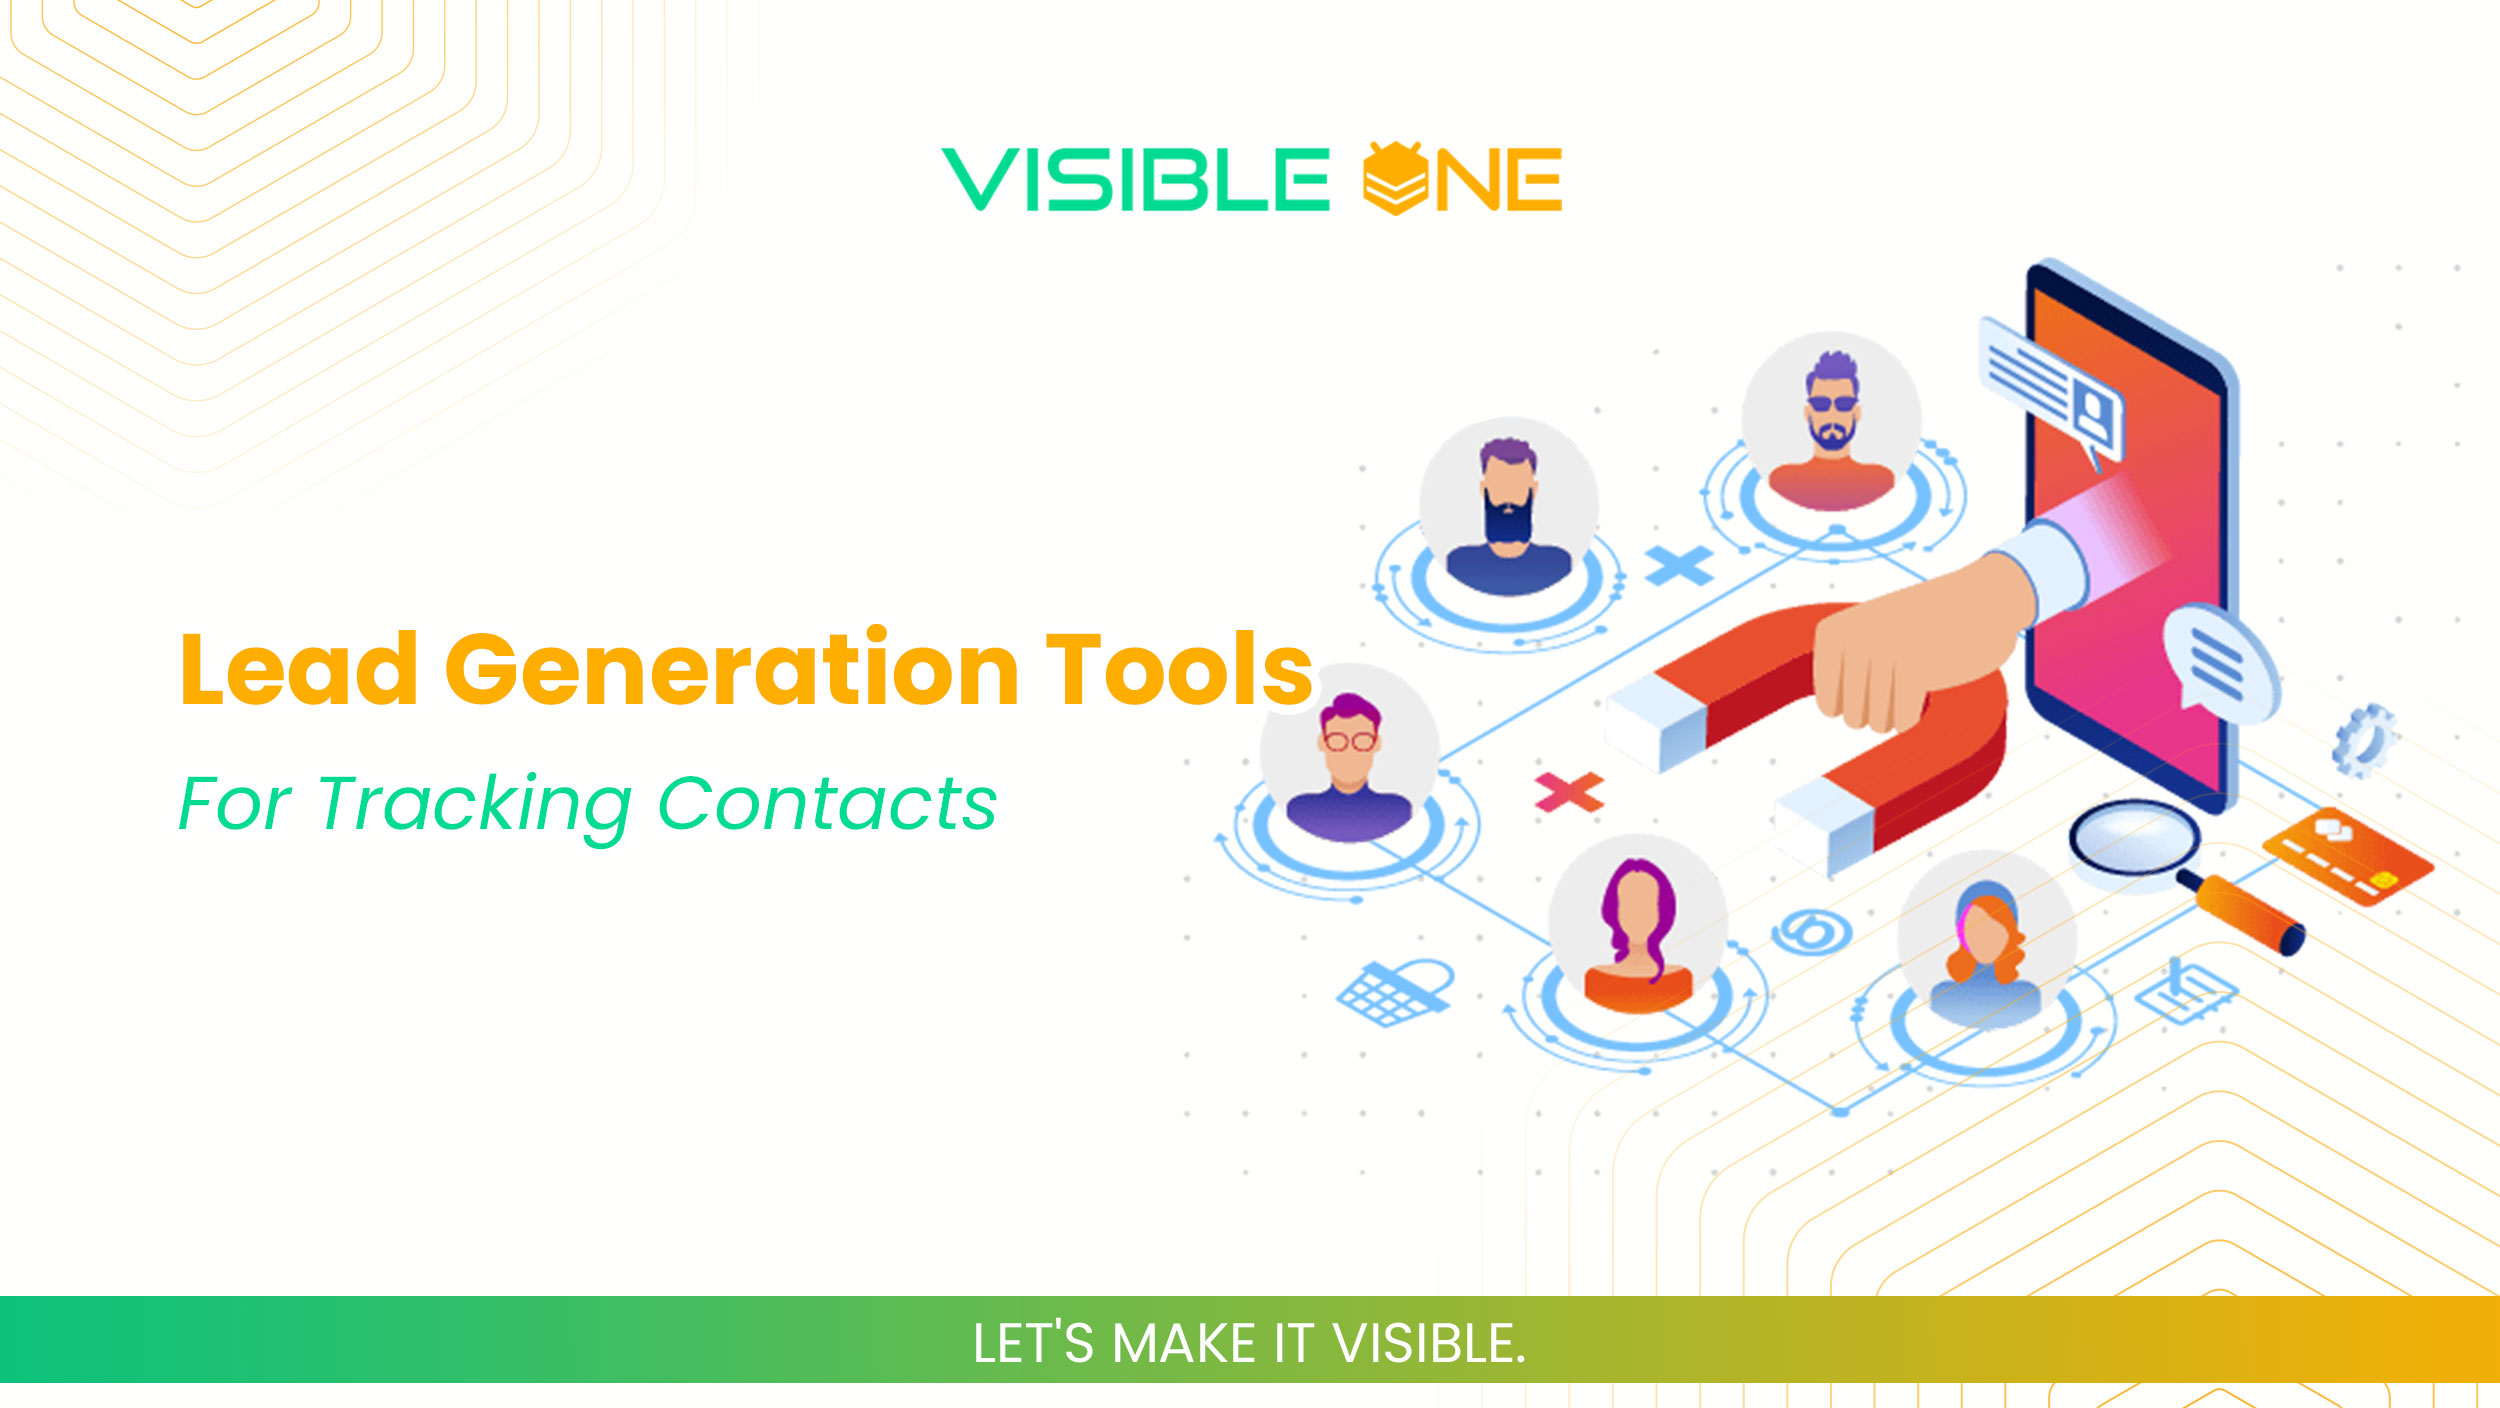 Lead Generation Tools for Tracking Contacts